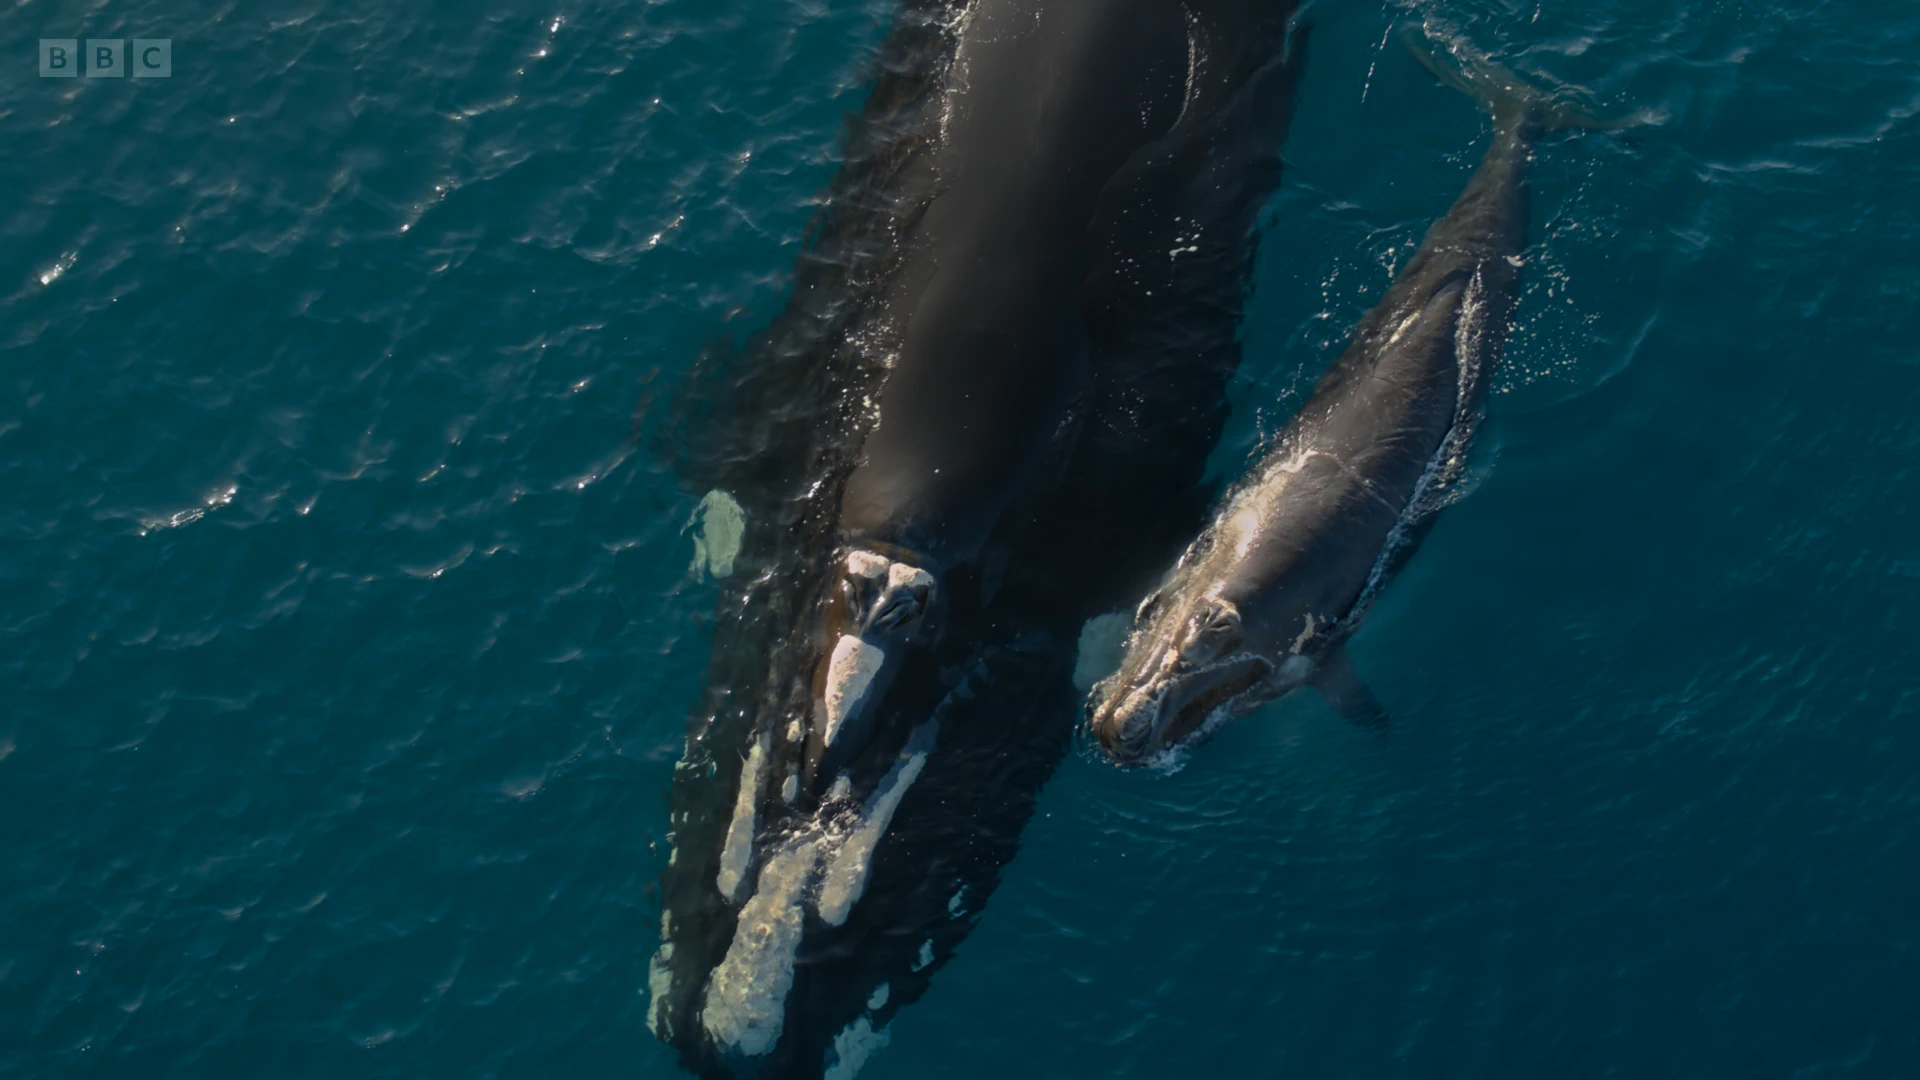 Southern right whale (Eubalaena australis) as shown in Seven Worlds, One Planet - Antarctica